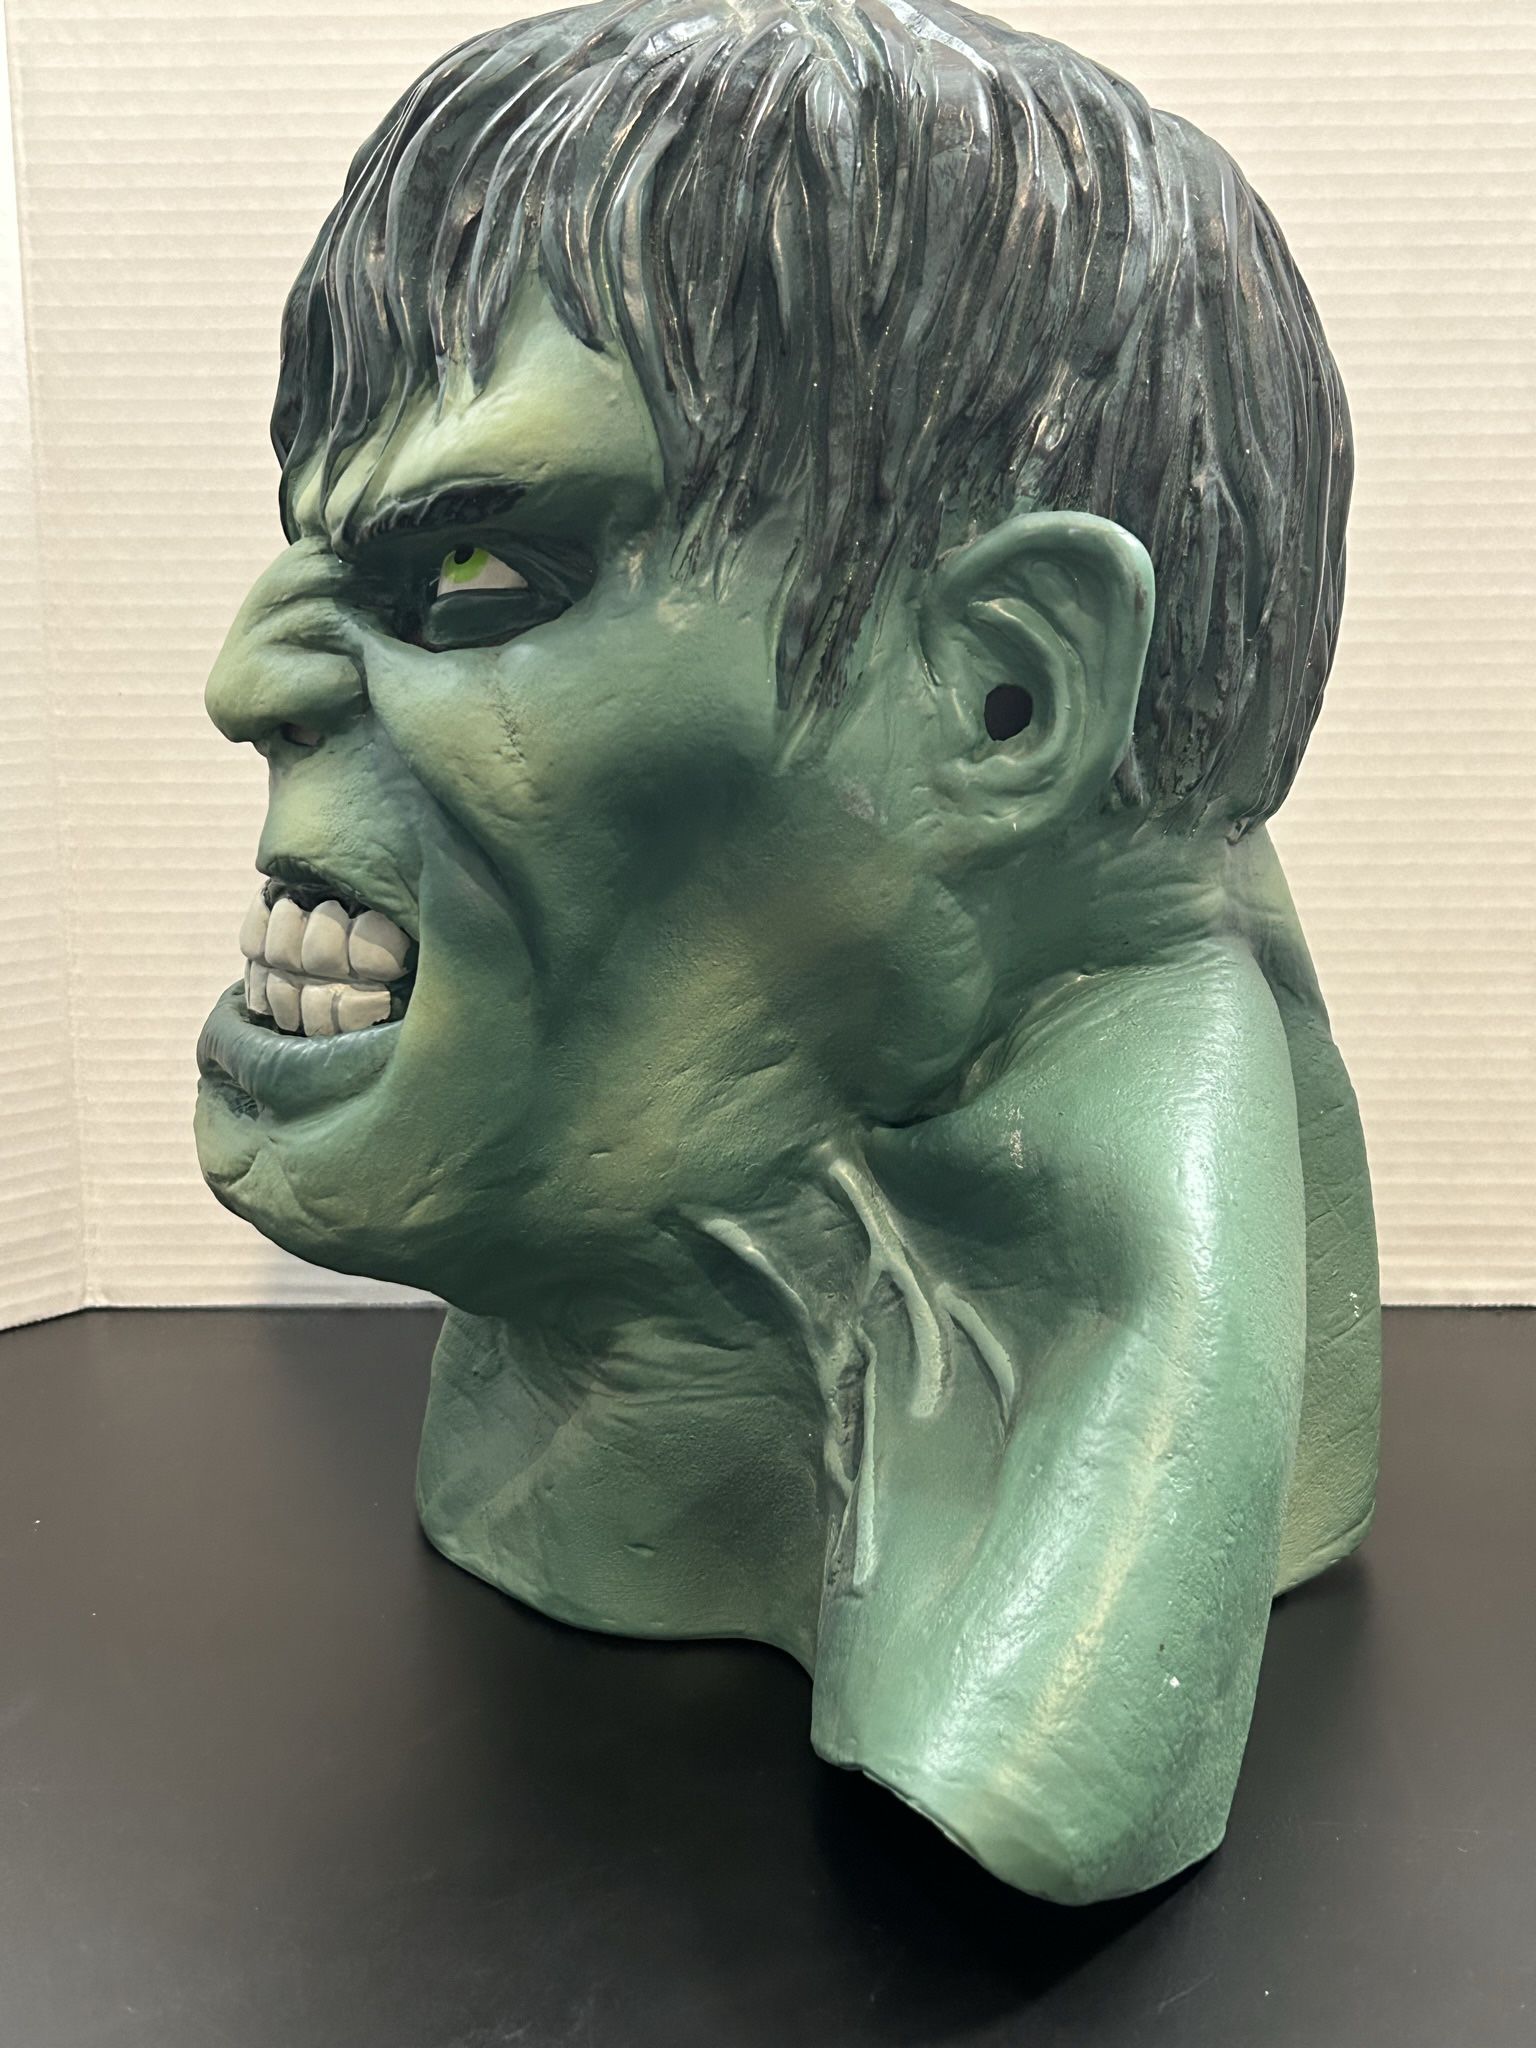 Incredible Hulk Rubber Mask Cosplay 2008 Disguise Inc Marvel